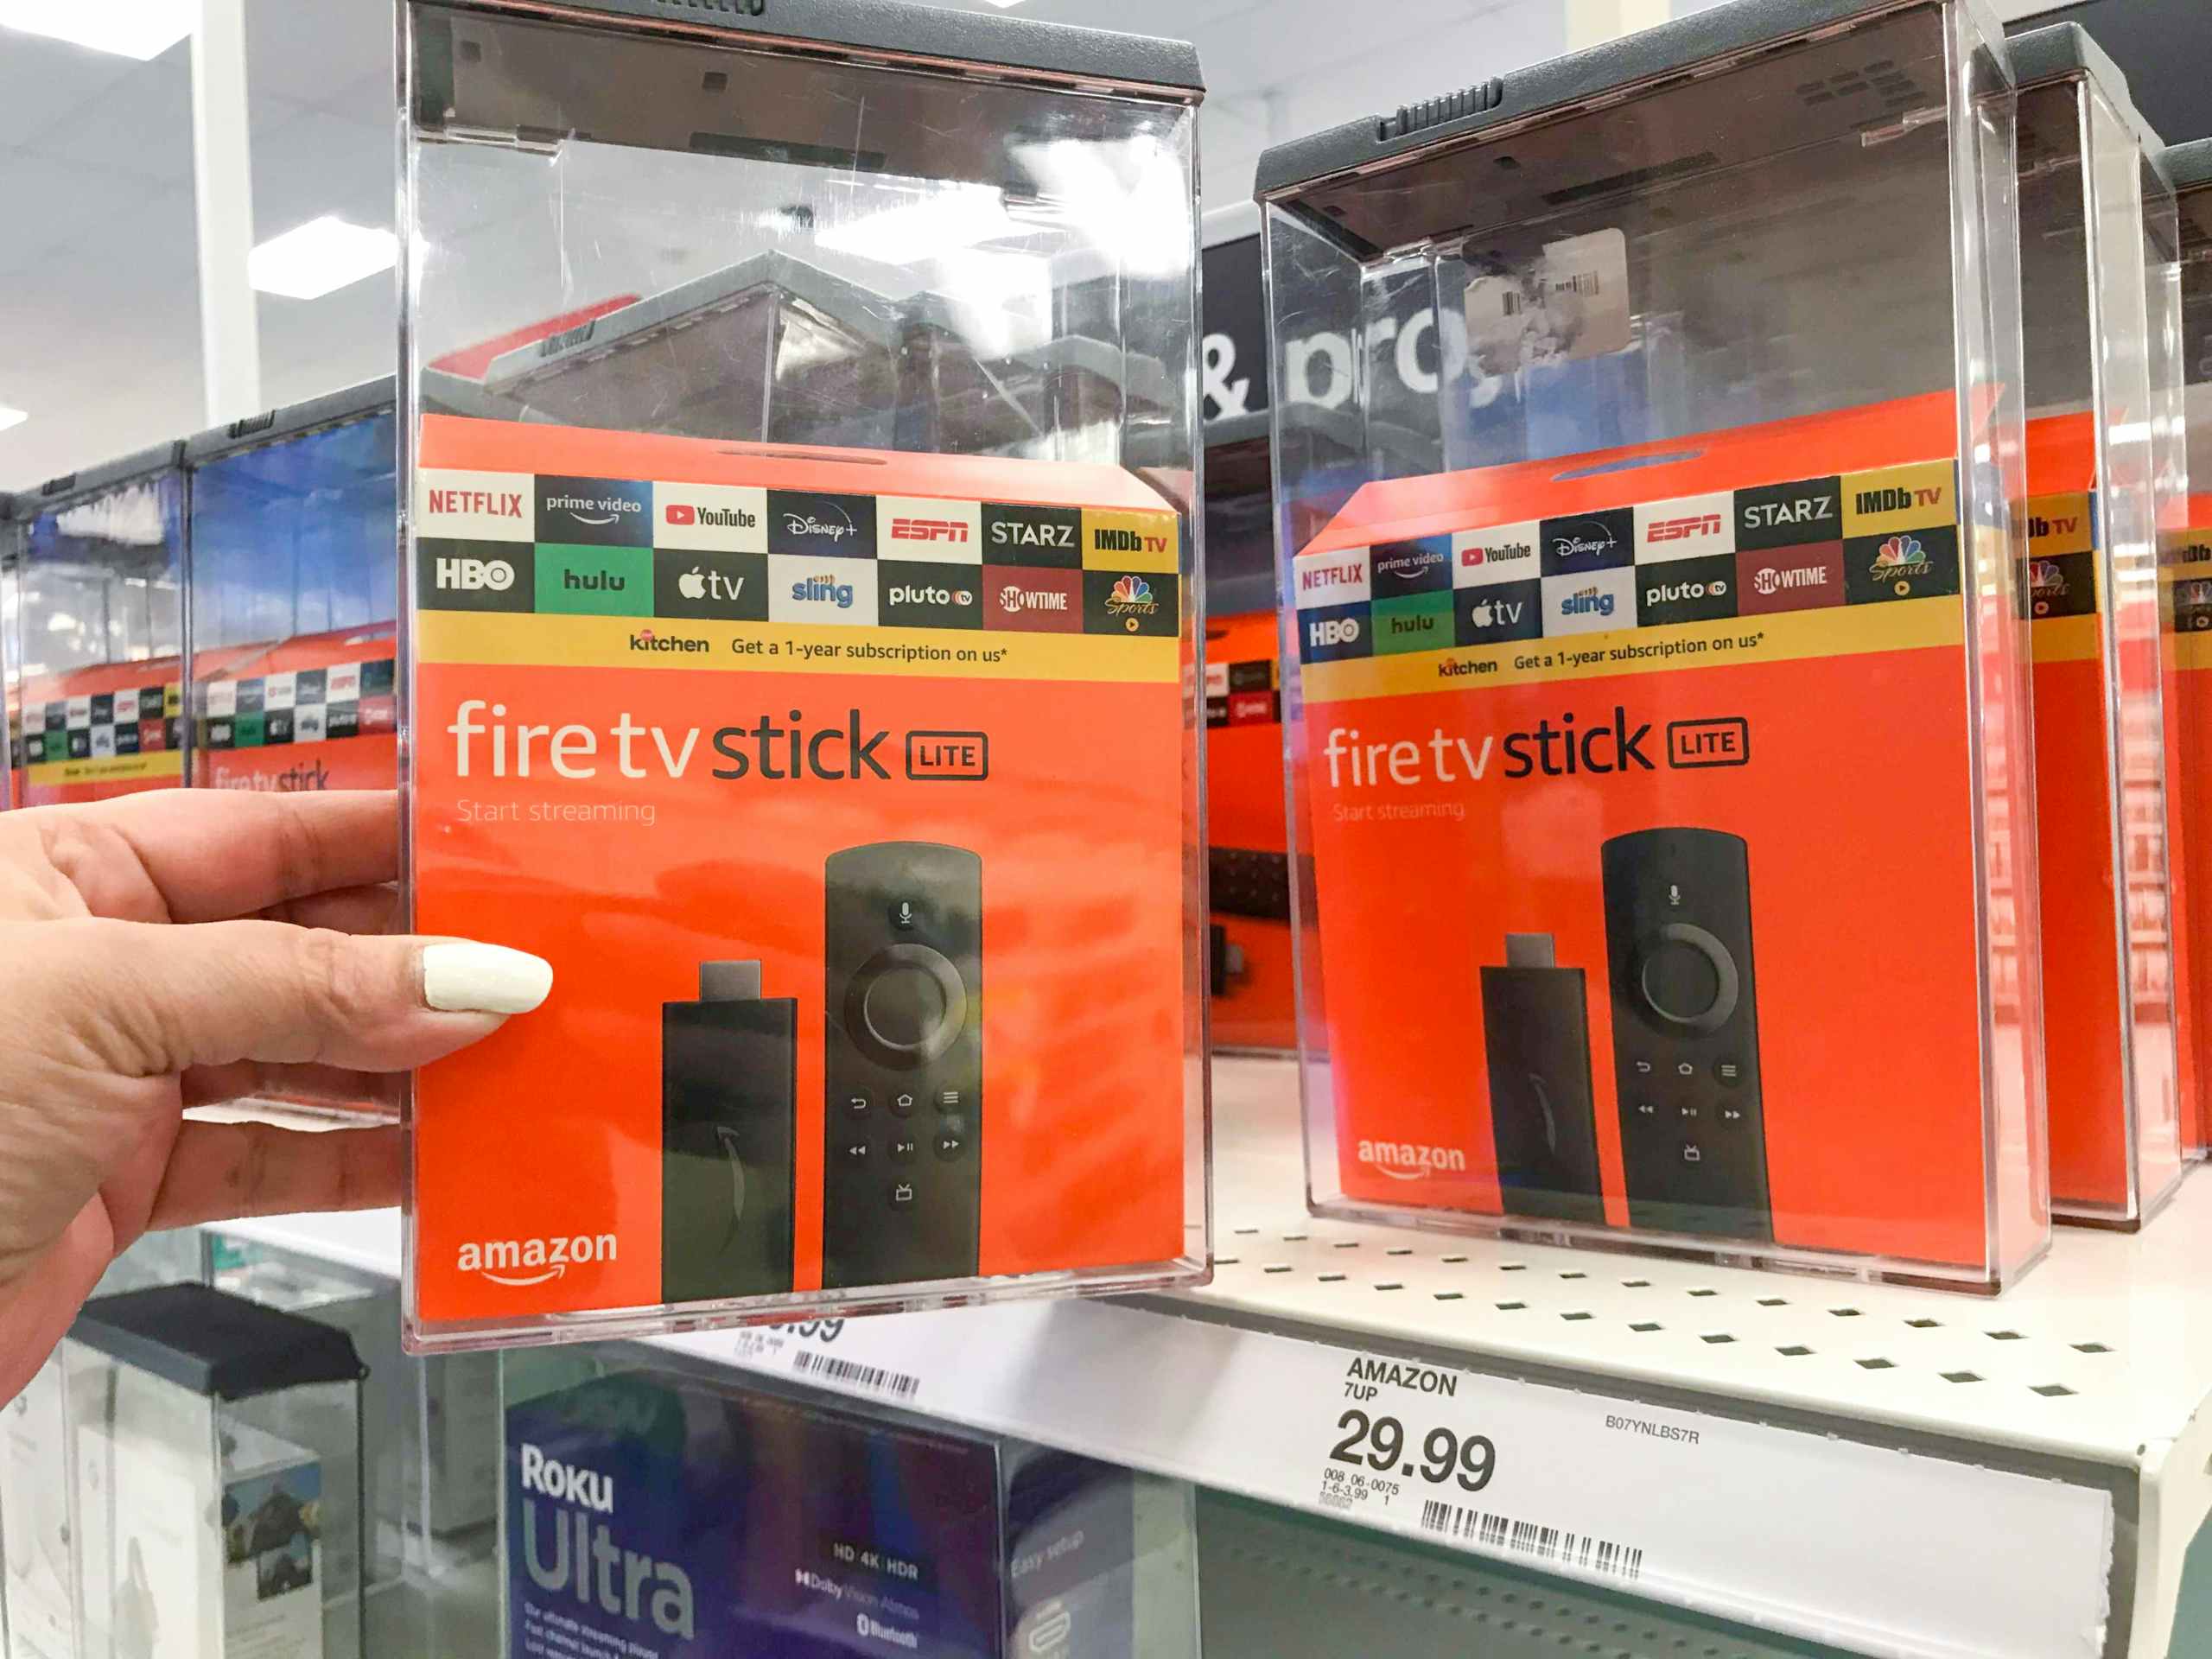 hand holding Amazon fire stick box in front of Target store shelf